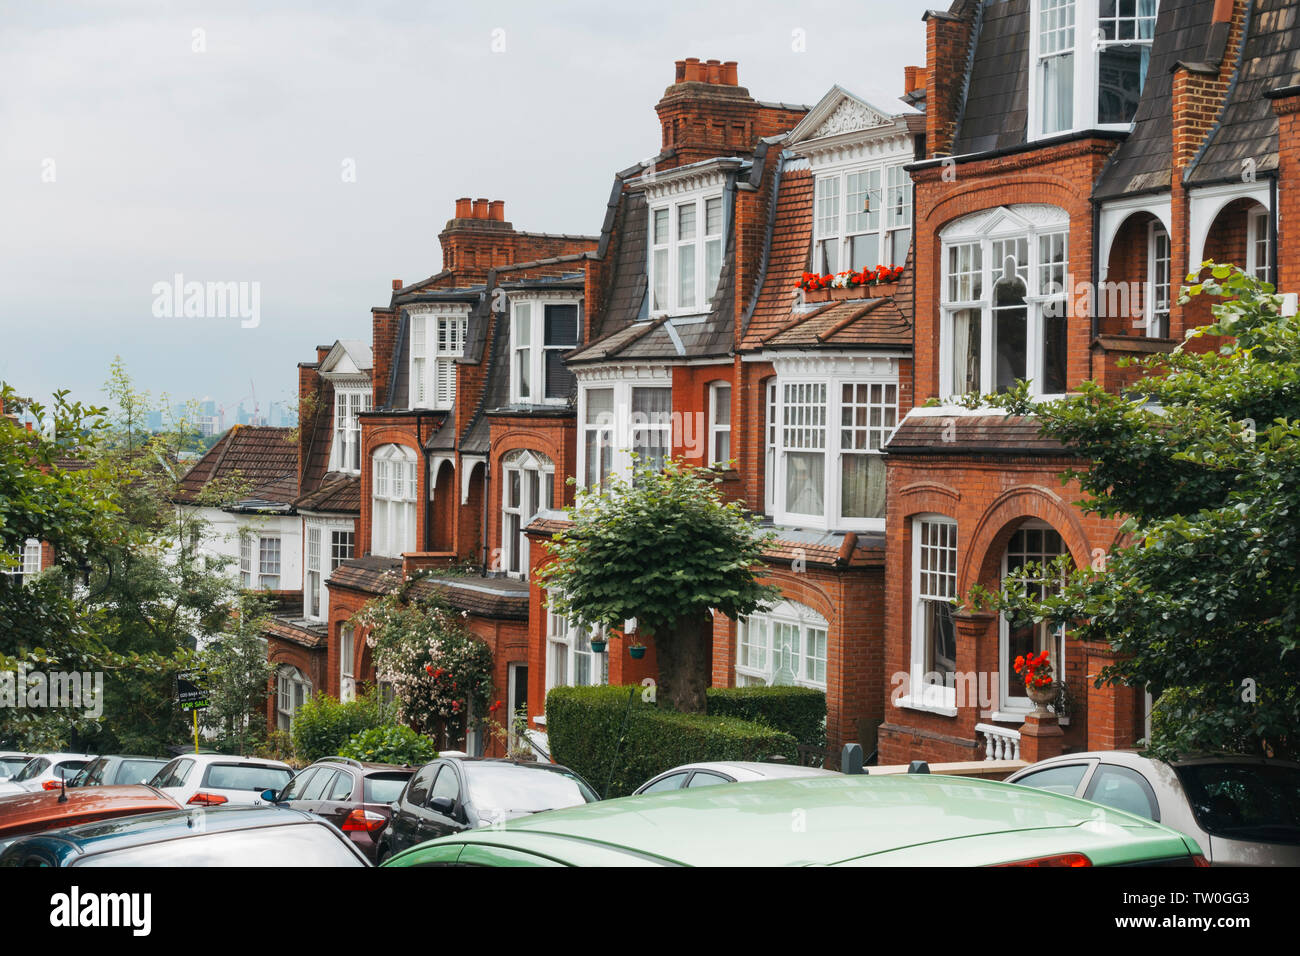 Looking down the peaceful terrace-housed streets of Muswell Hill, North London, on a muggy summer's morning. London skyline is visible behind Stock Photo